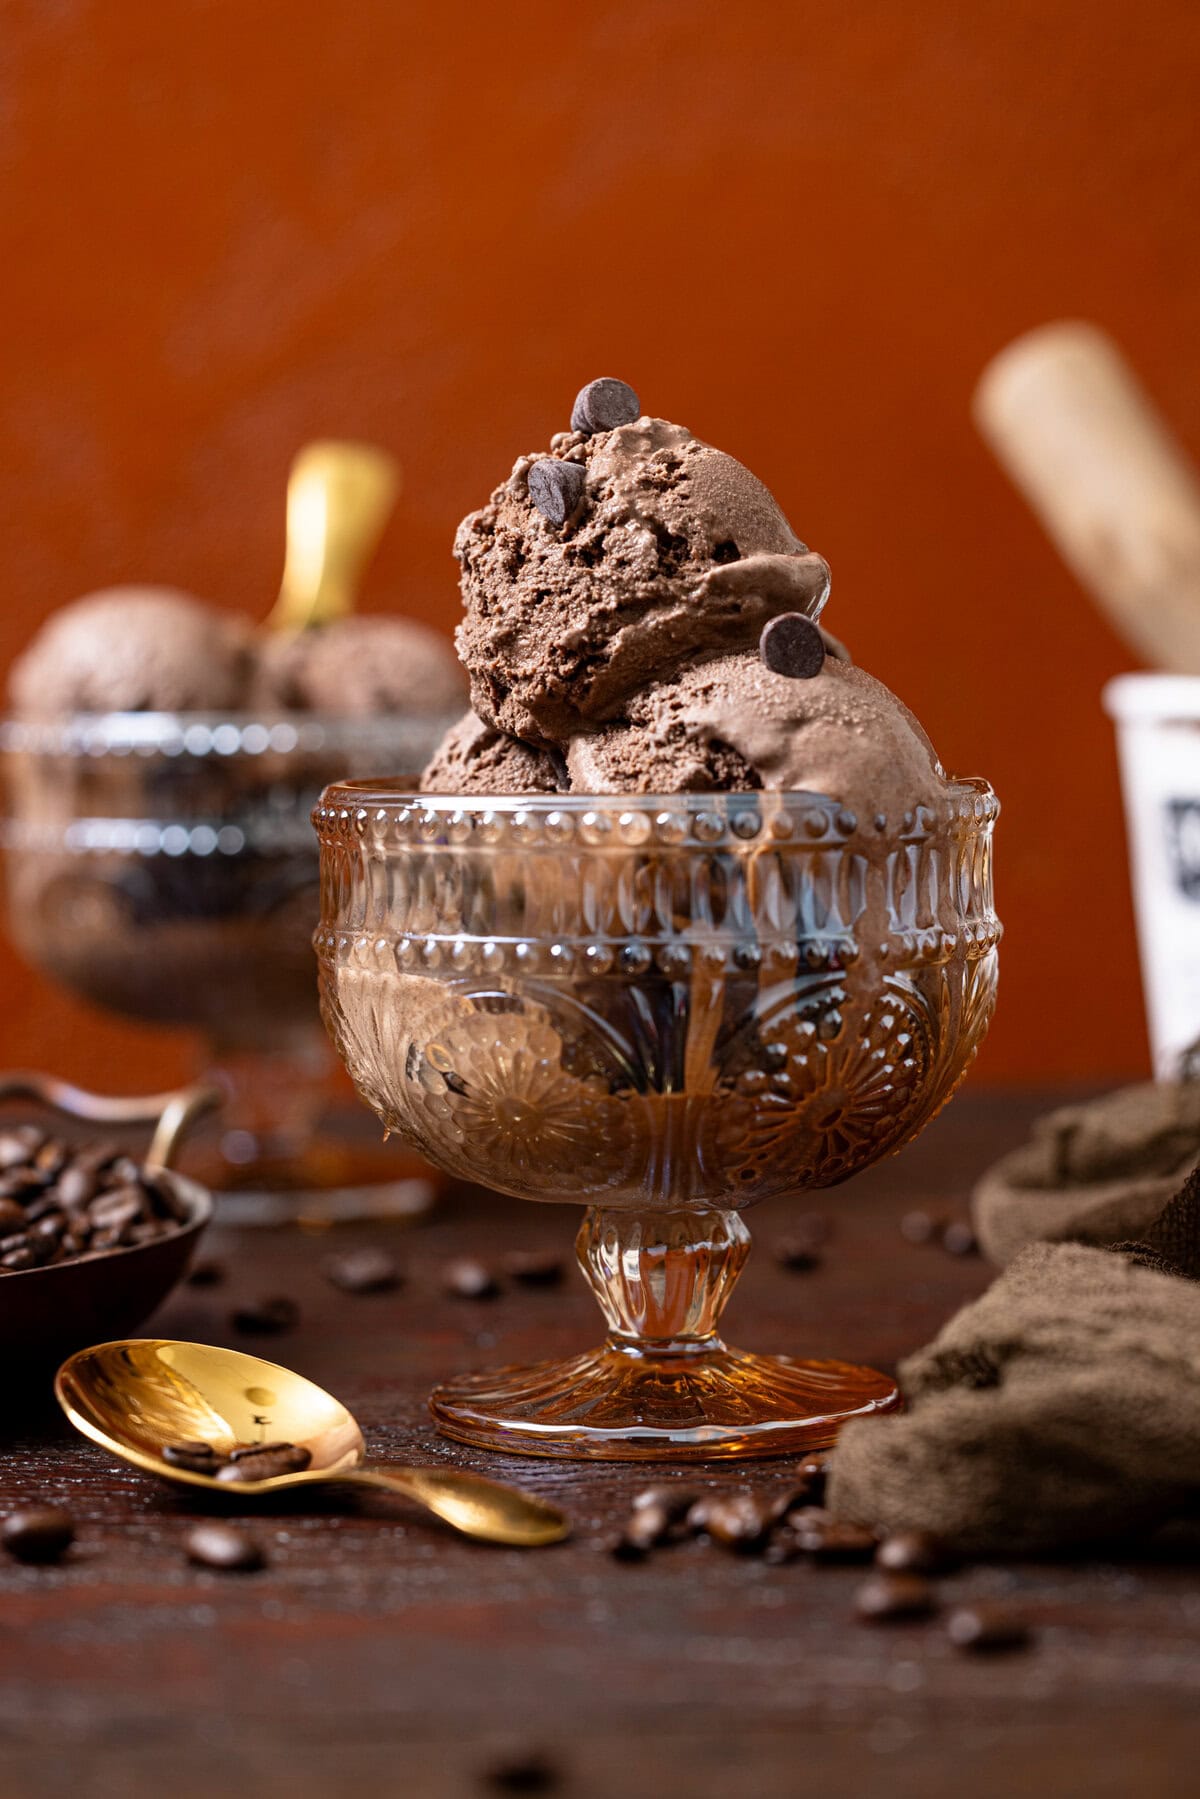 Two bowls of chocolate ice cream with a tub of ice cream in the background, spoons, and espresso beans.